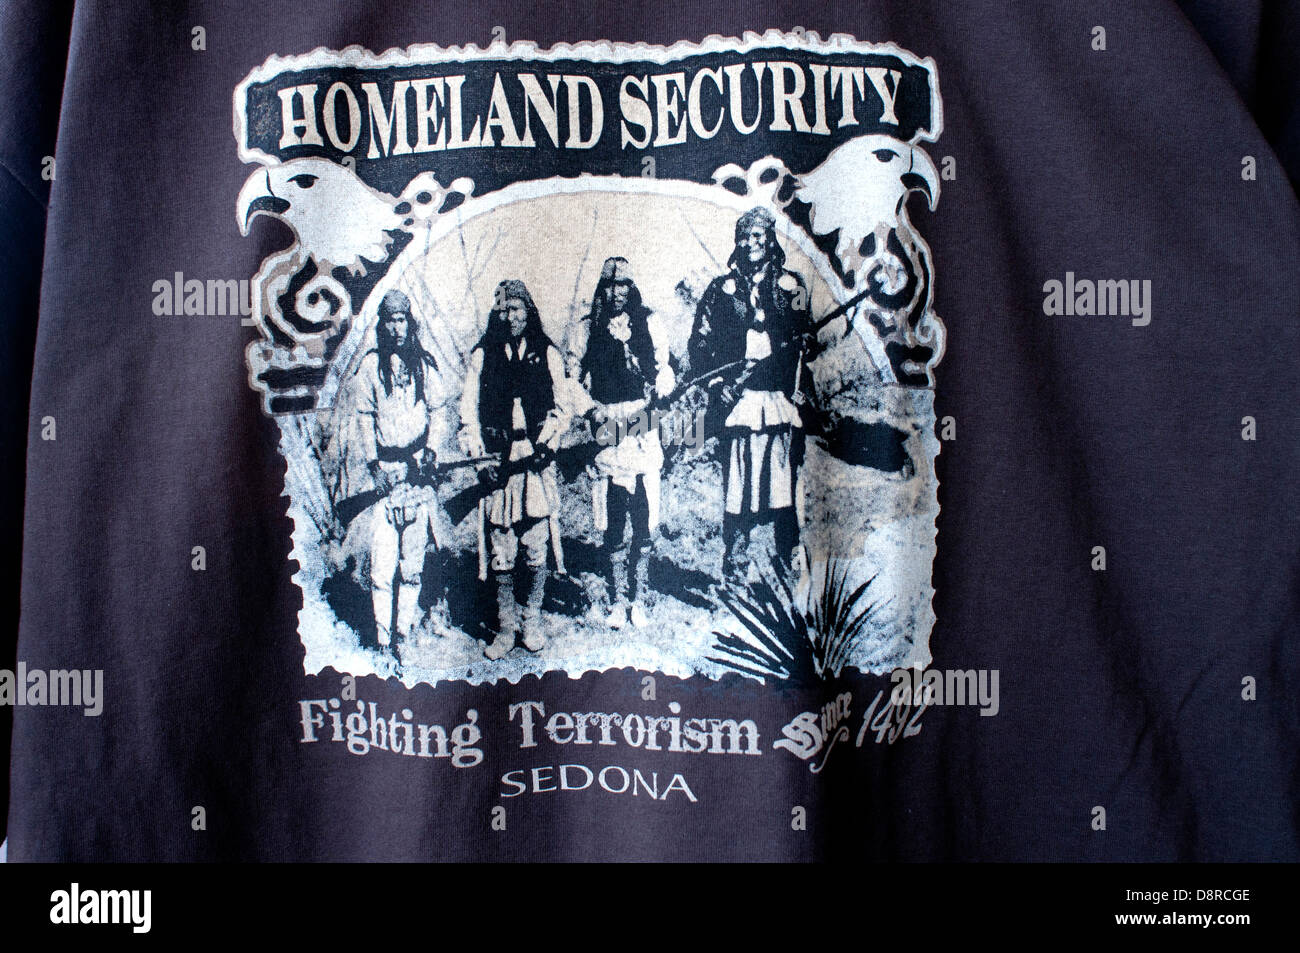 T-shirt mocking the US government's Homeland Security policy. Stock Photo